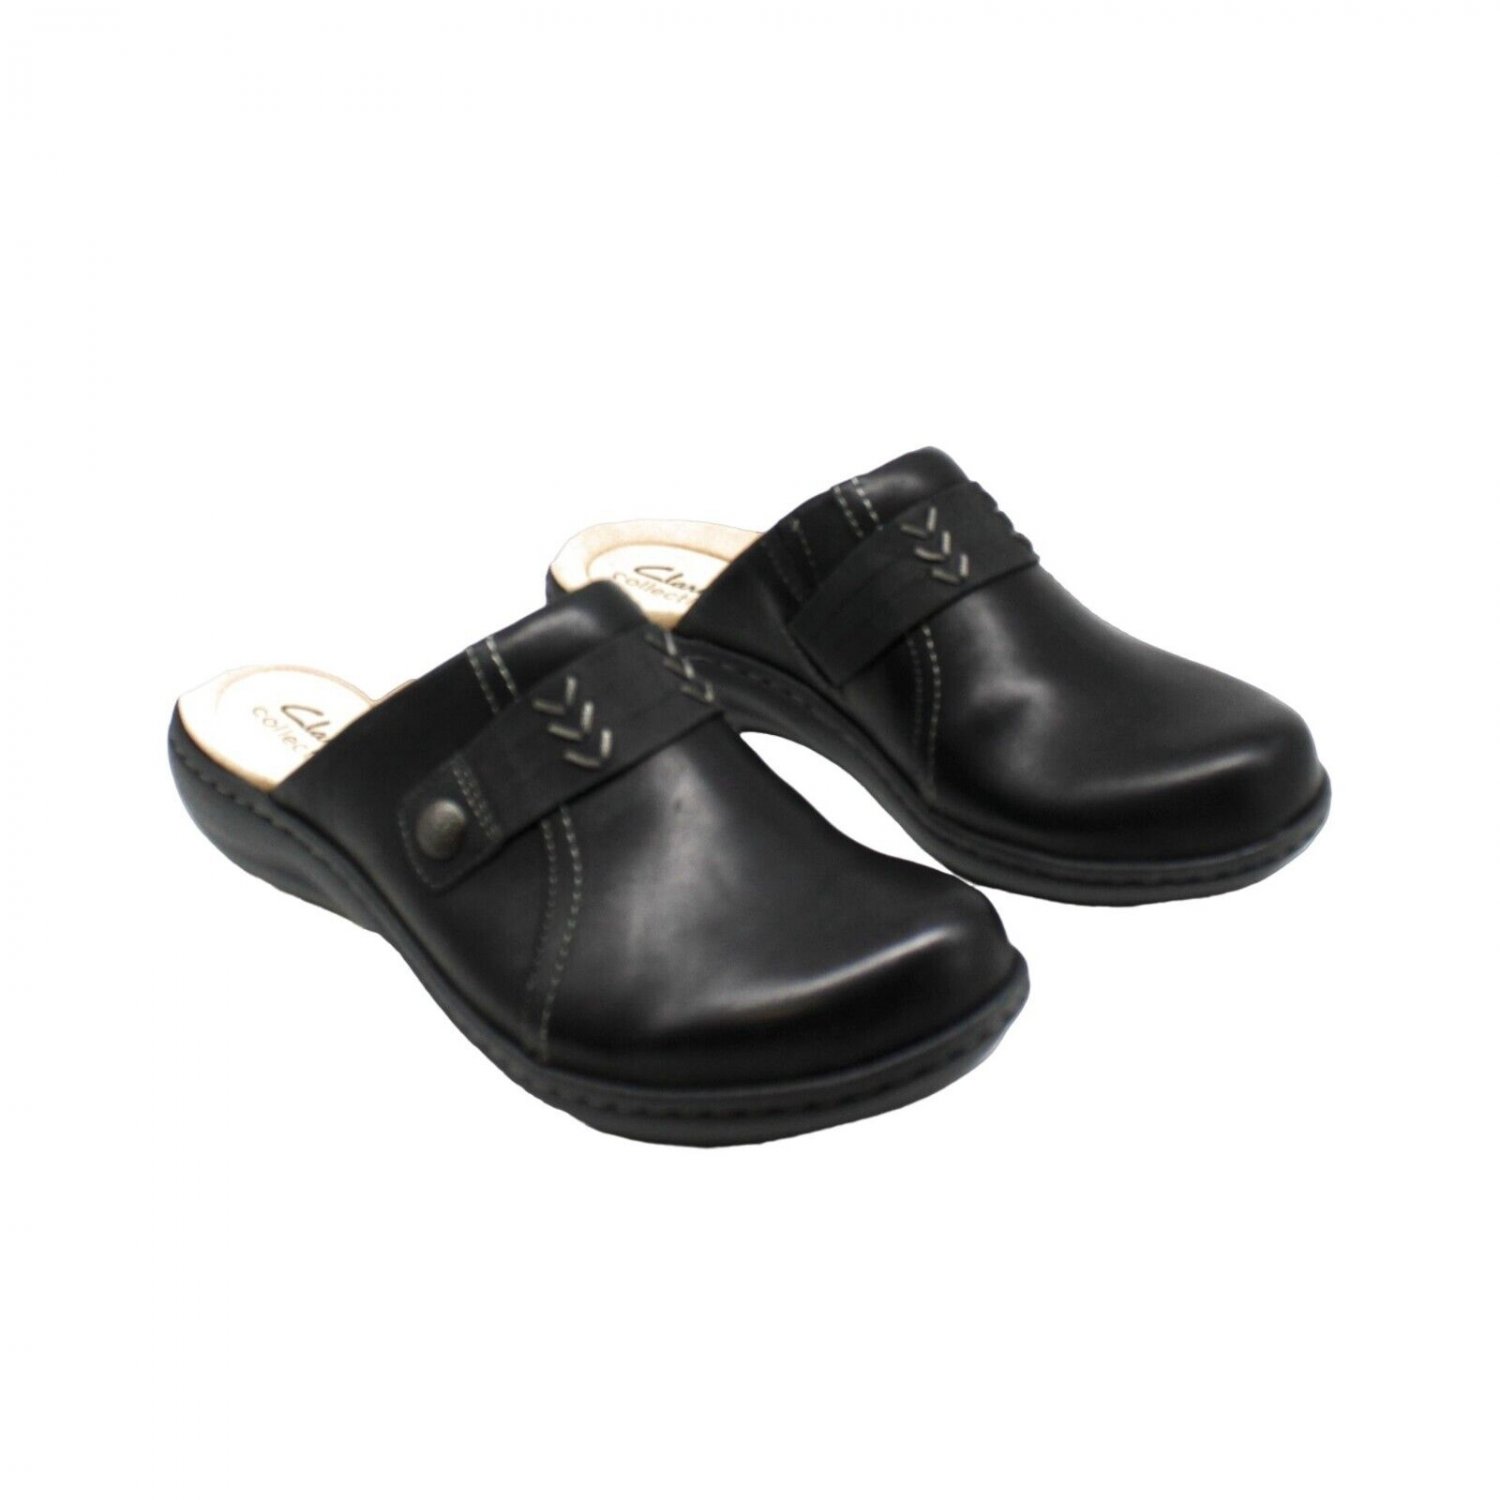 Comfort and Style Meet in Clarks Women's Angie Mist Clogs